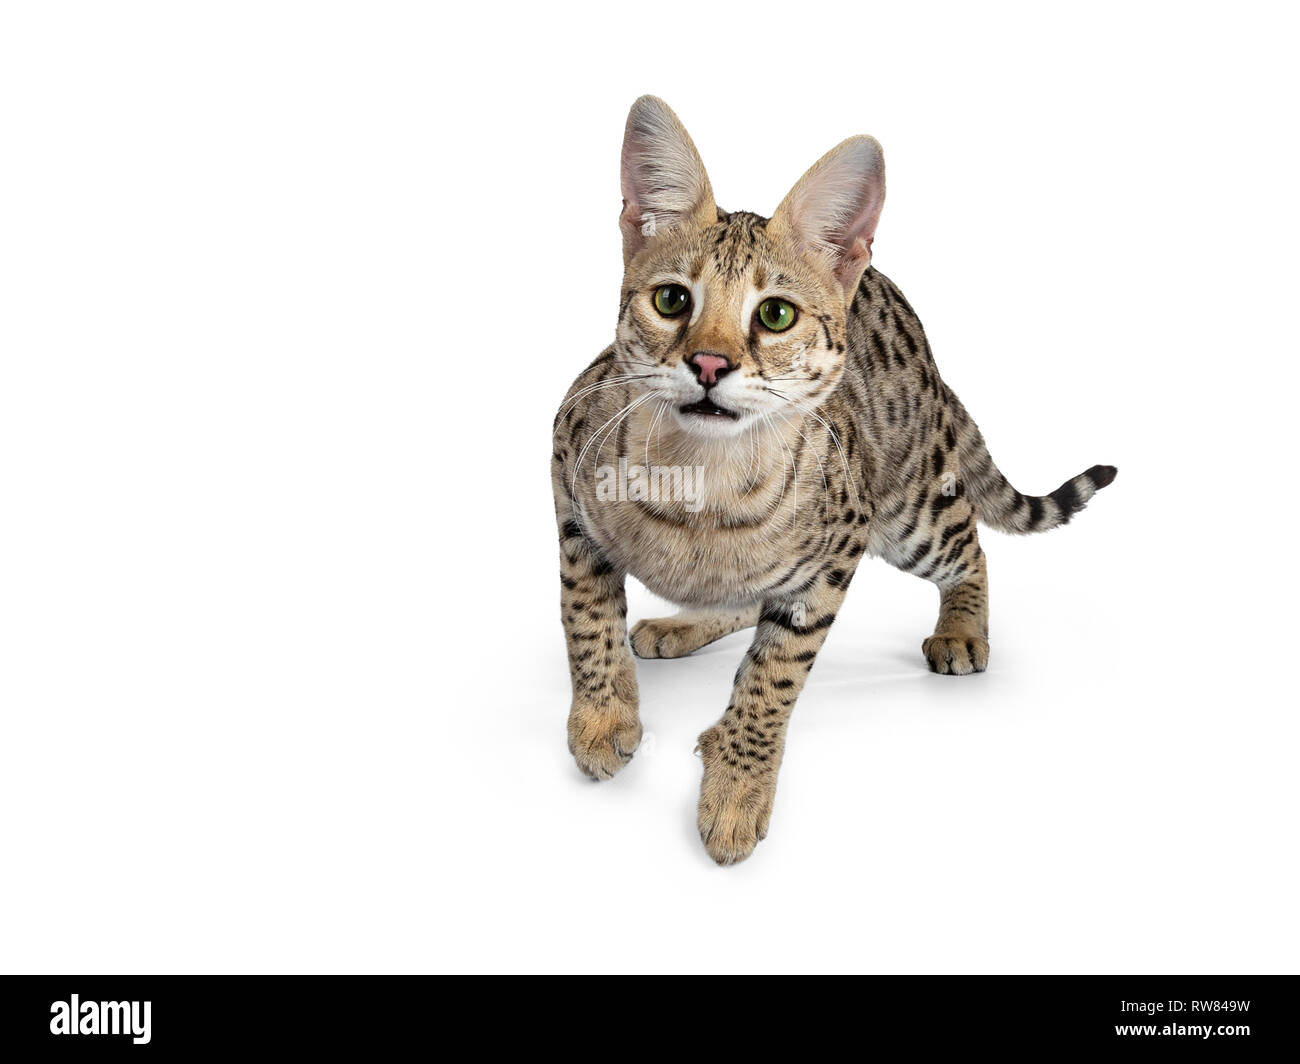 Cool young adult Savannah F1 cat, ready to jump. Looking straight ahead beside camera with green eyes. Isolated on white background. Stock Photo